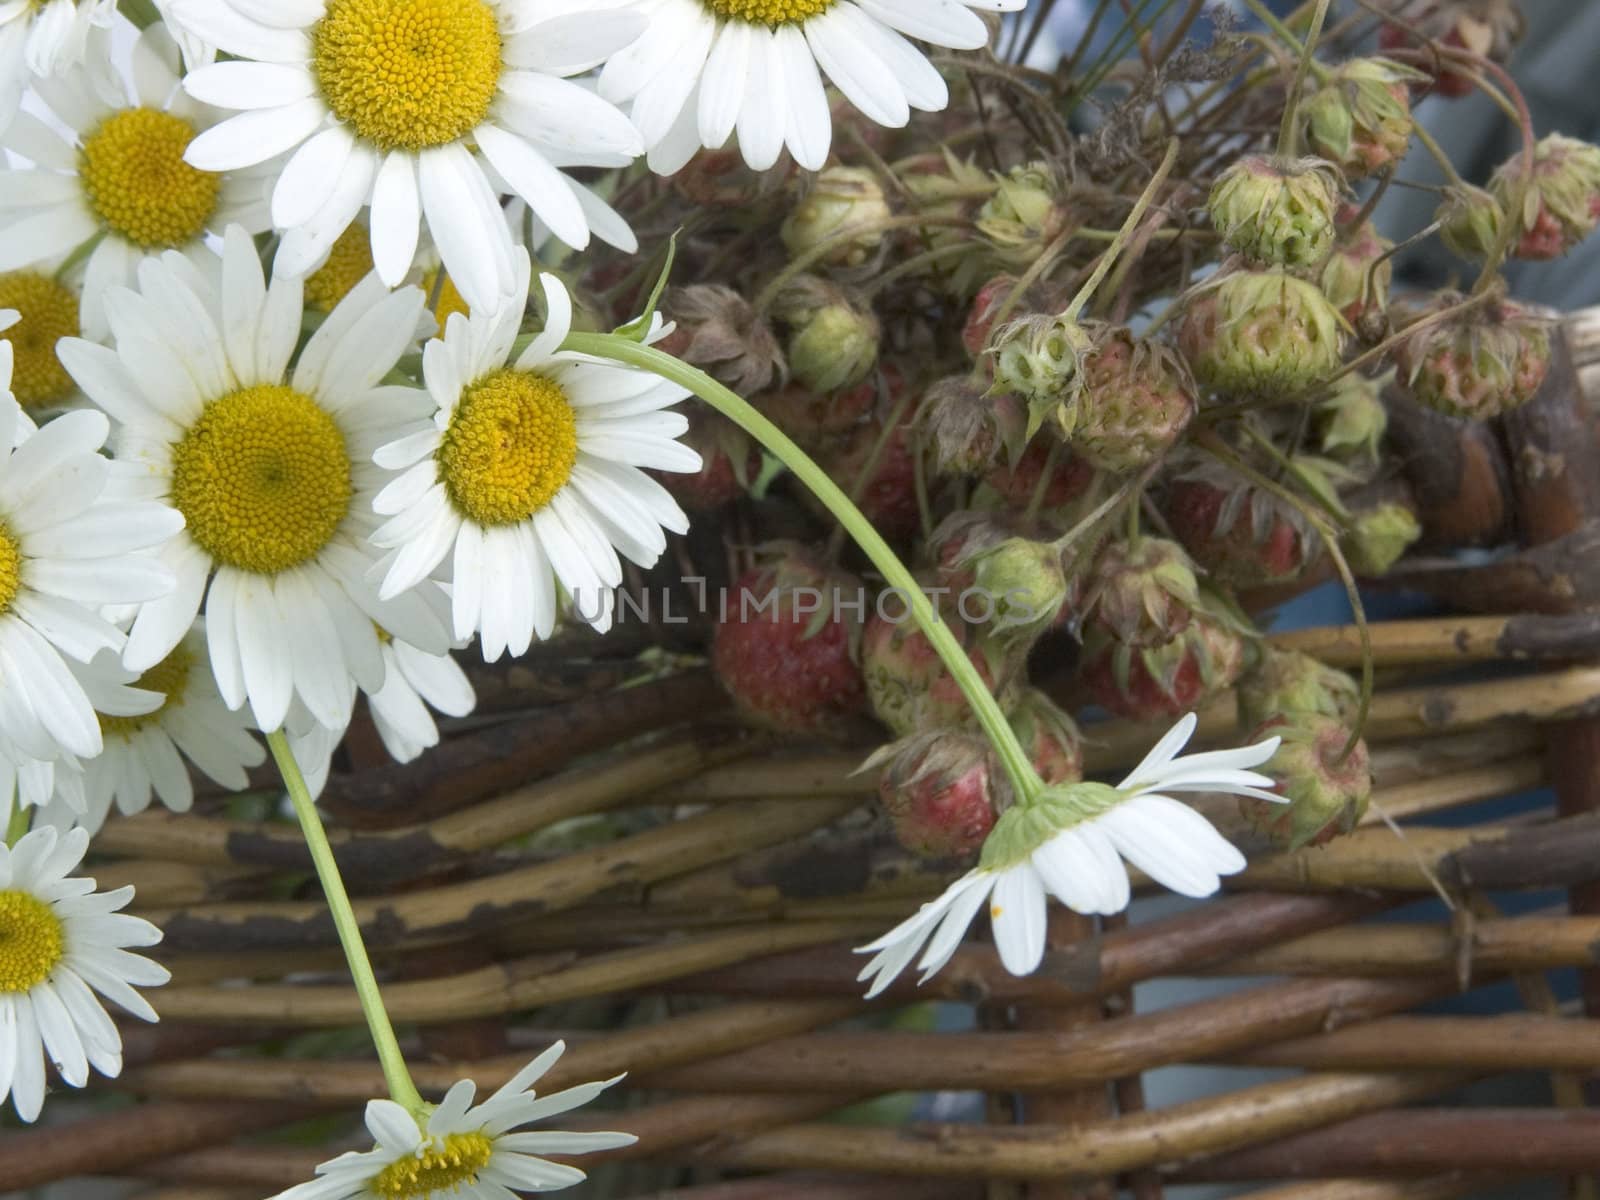 The image of a bouquet of camomiles and strawberries in a basket